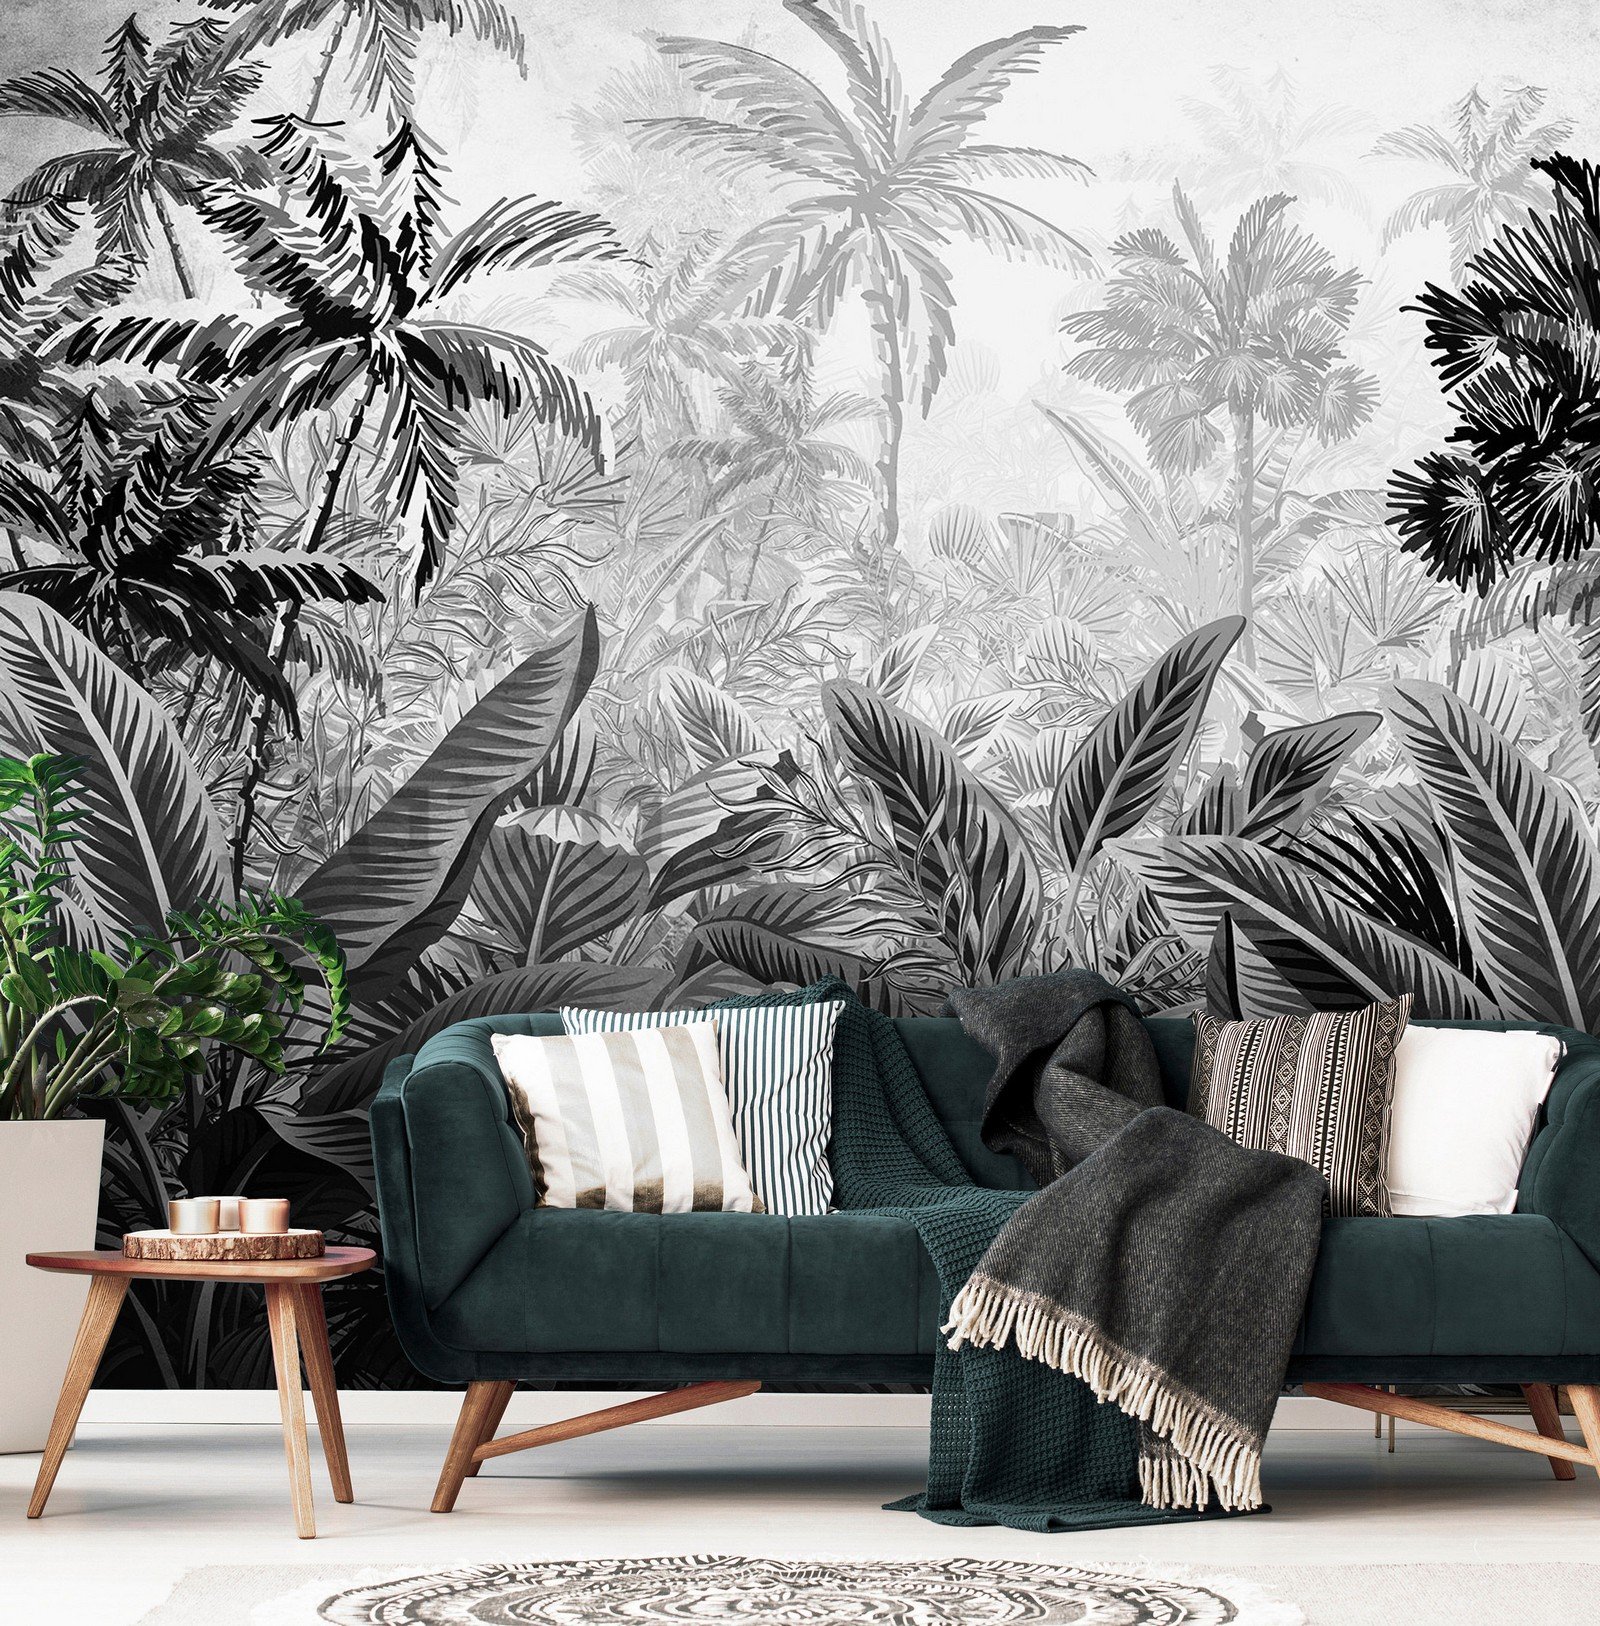 Wall mural vlies: Palm trees and ferns (black and white) - 368x254 cm